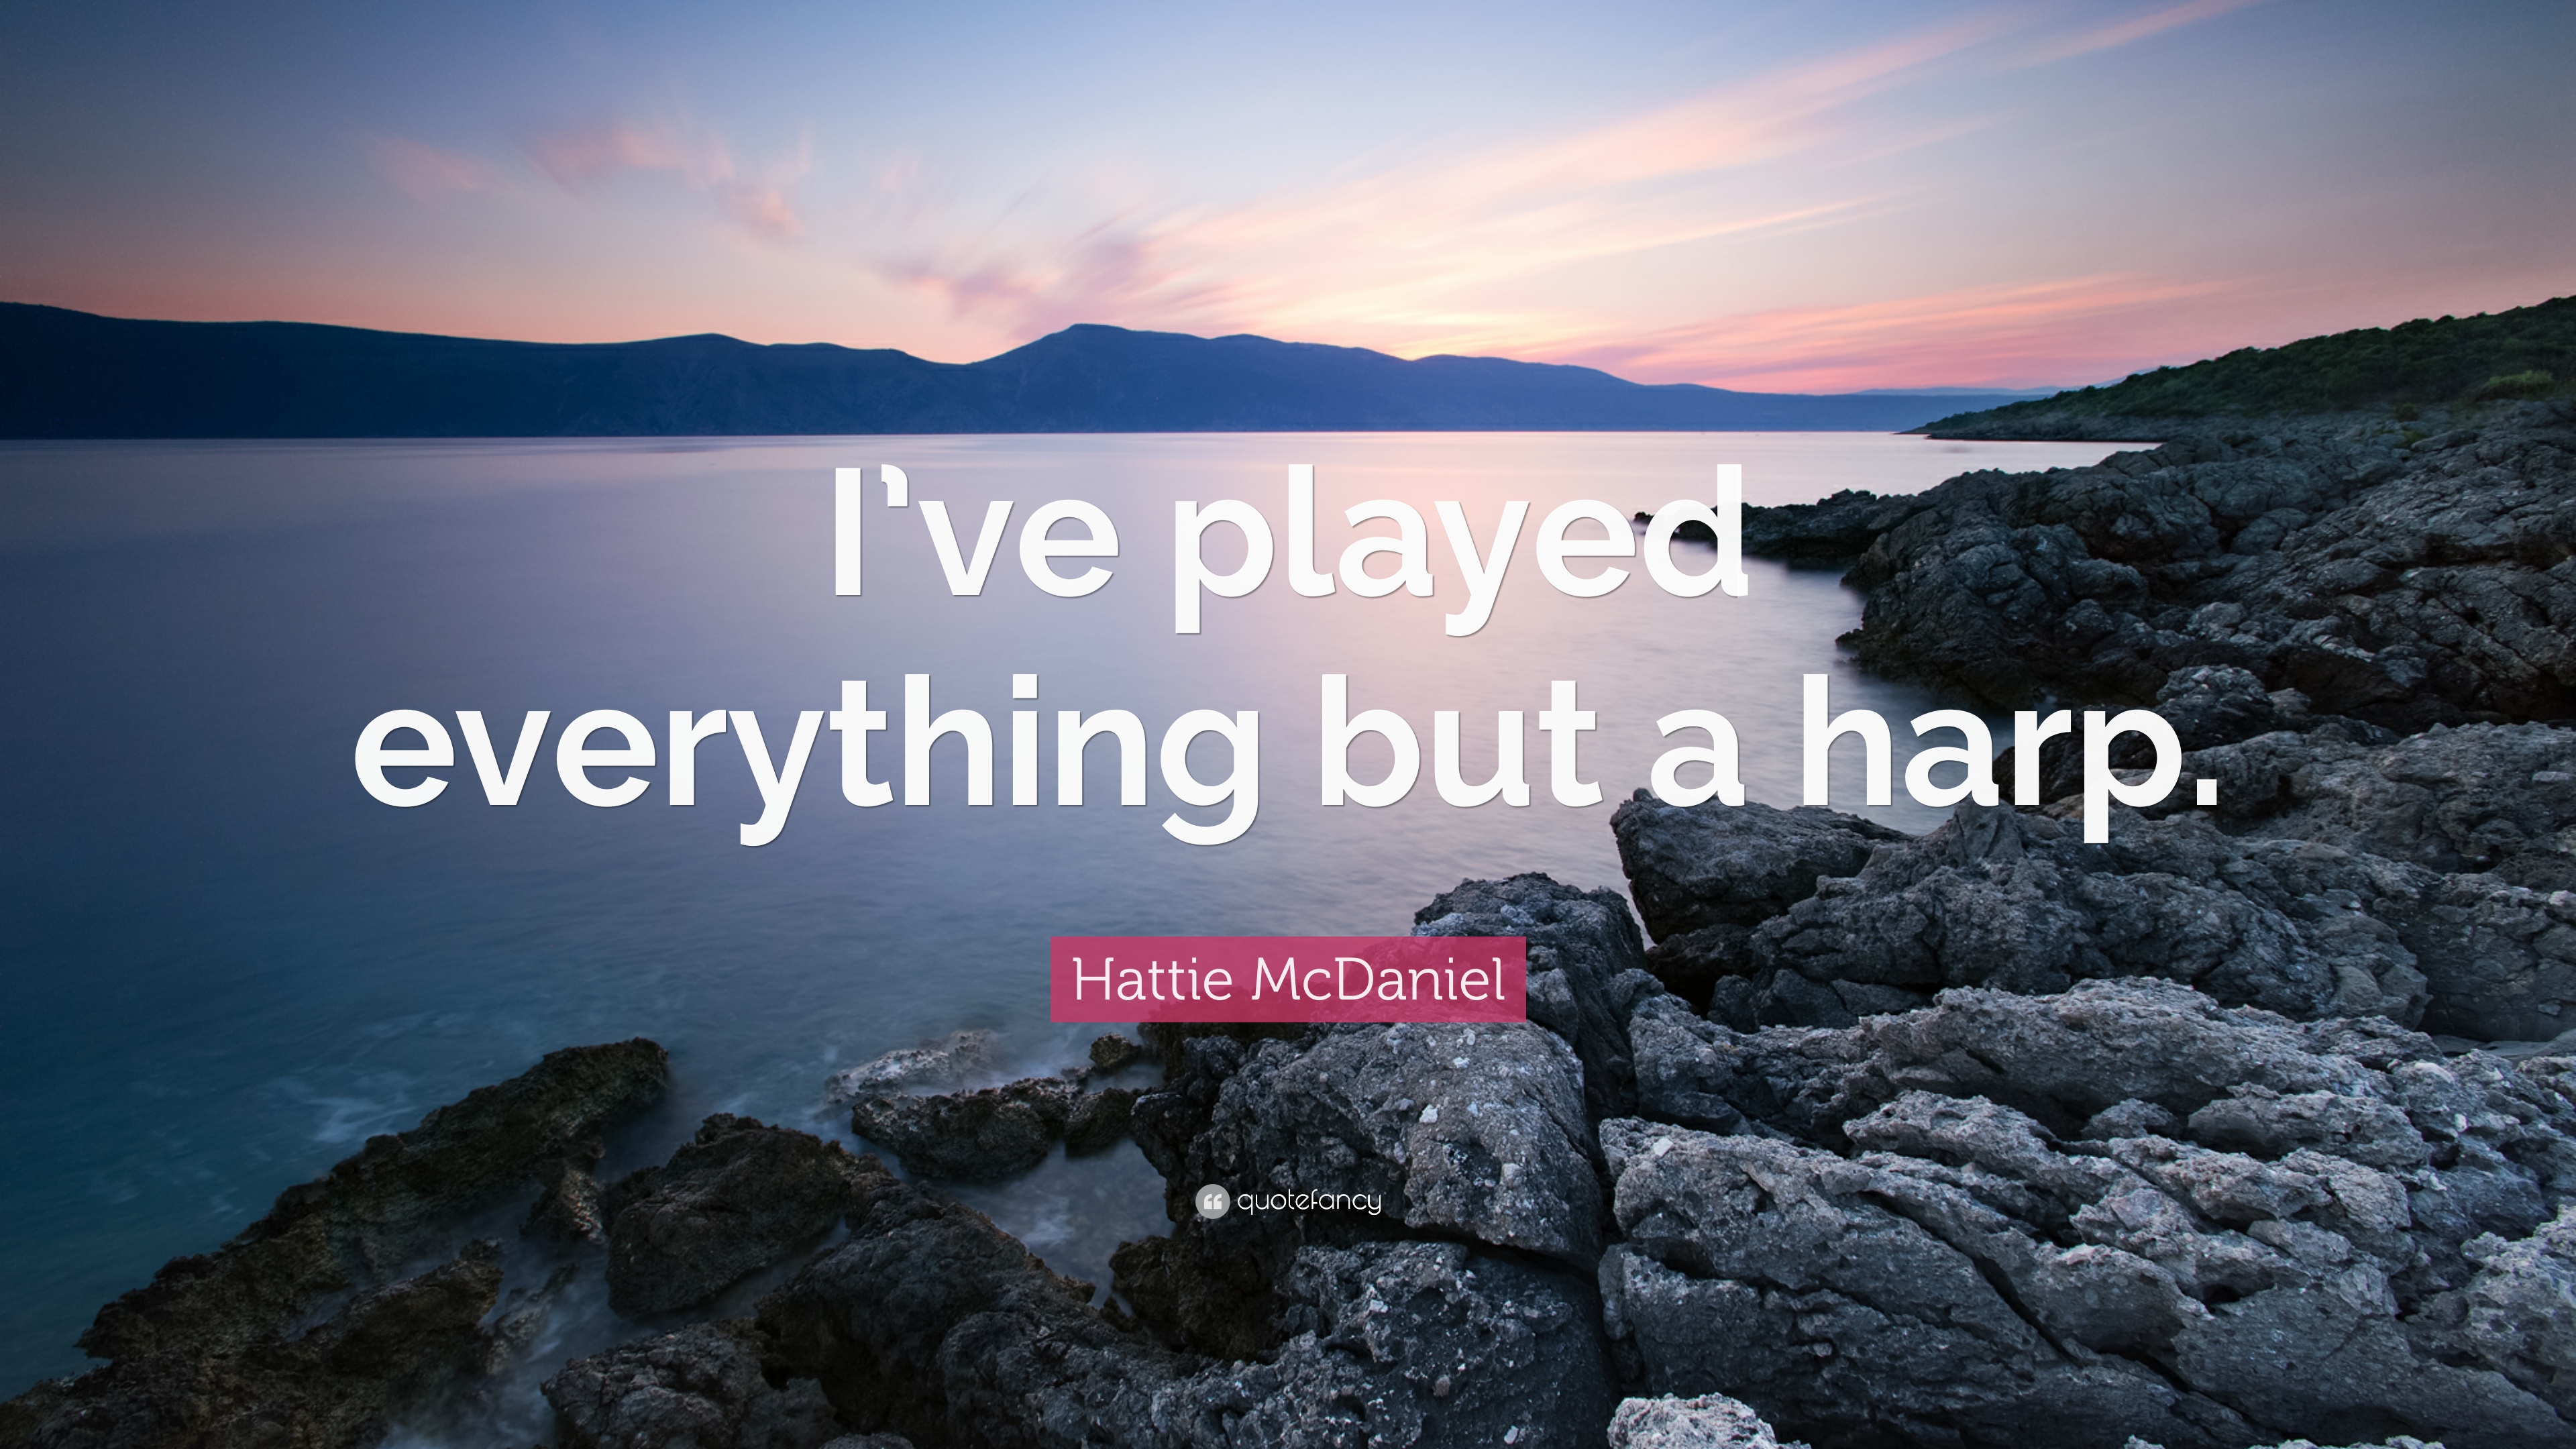 Hattie McDaniel Quote: “I've played everything but a harp.” 7